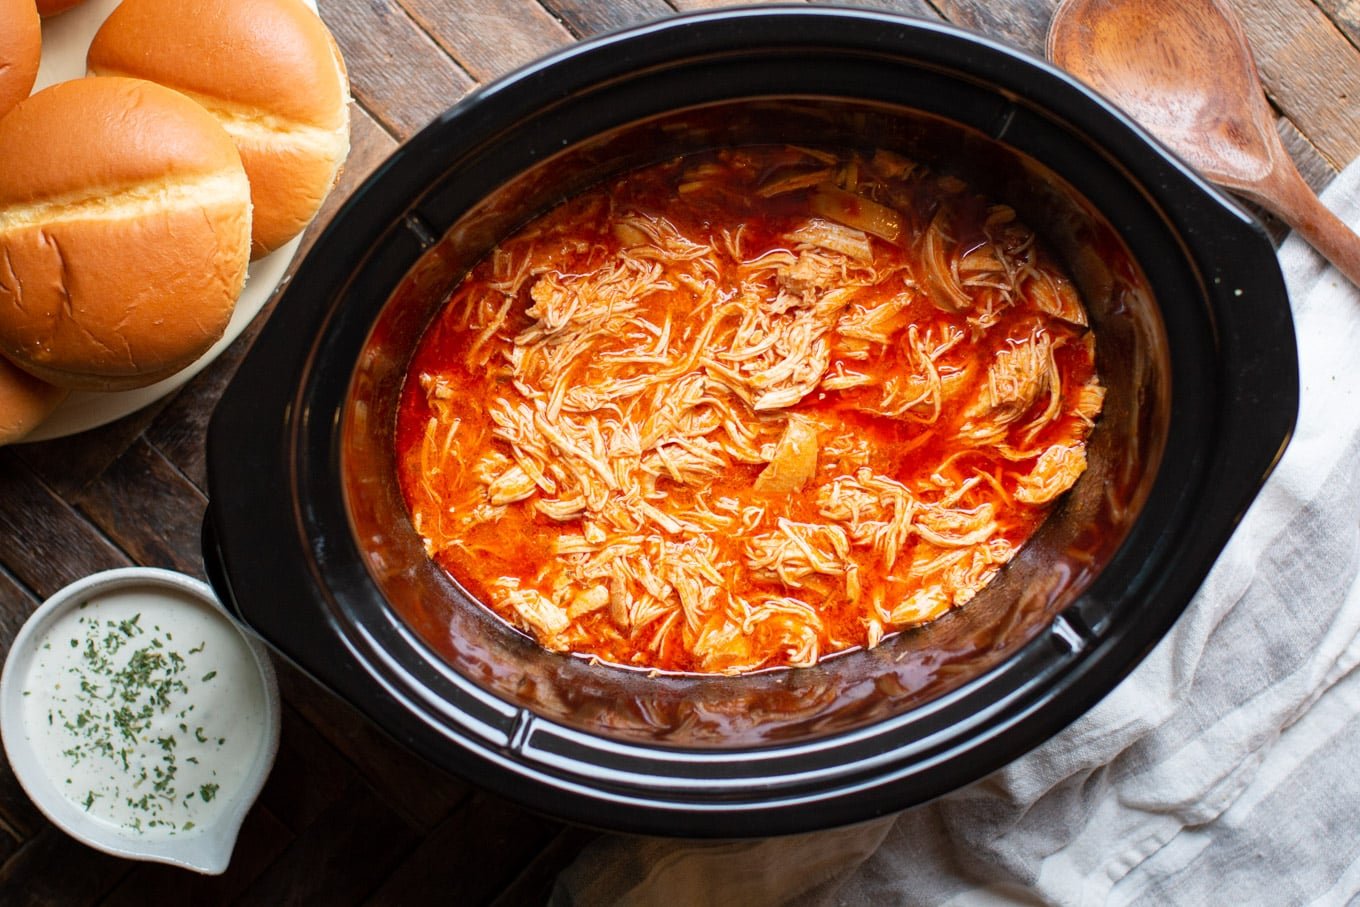 shredded chicken in slow cooker with buns, ranch, and wooden spoon on side.